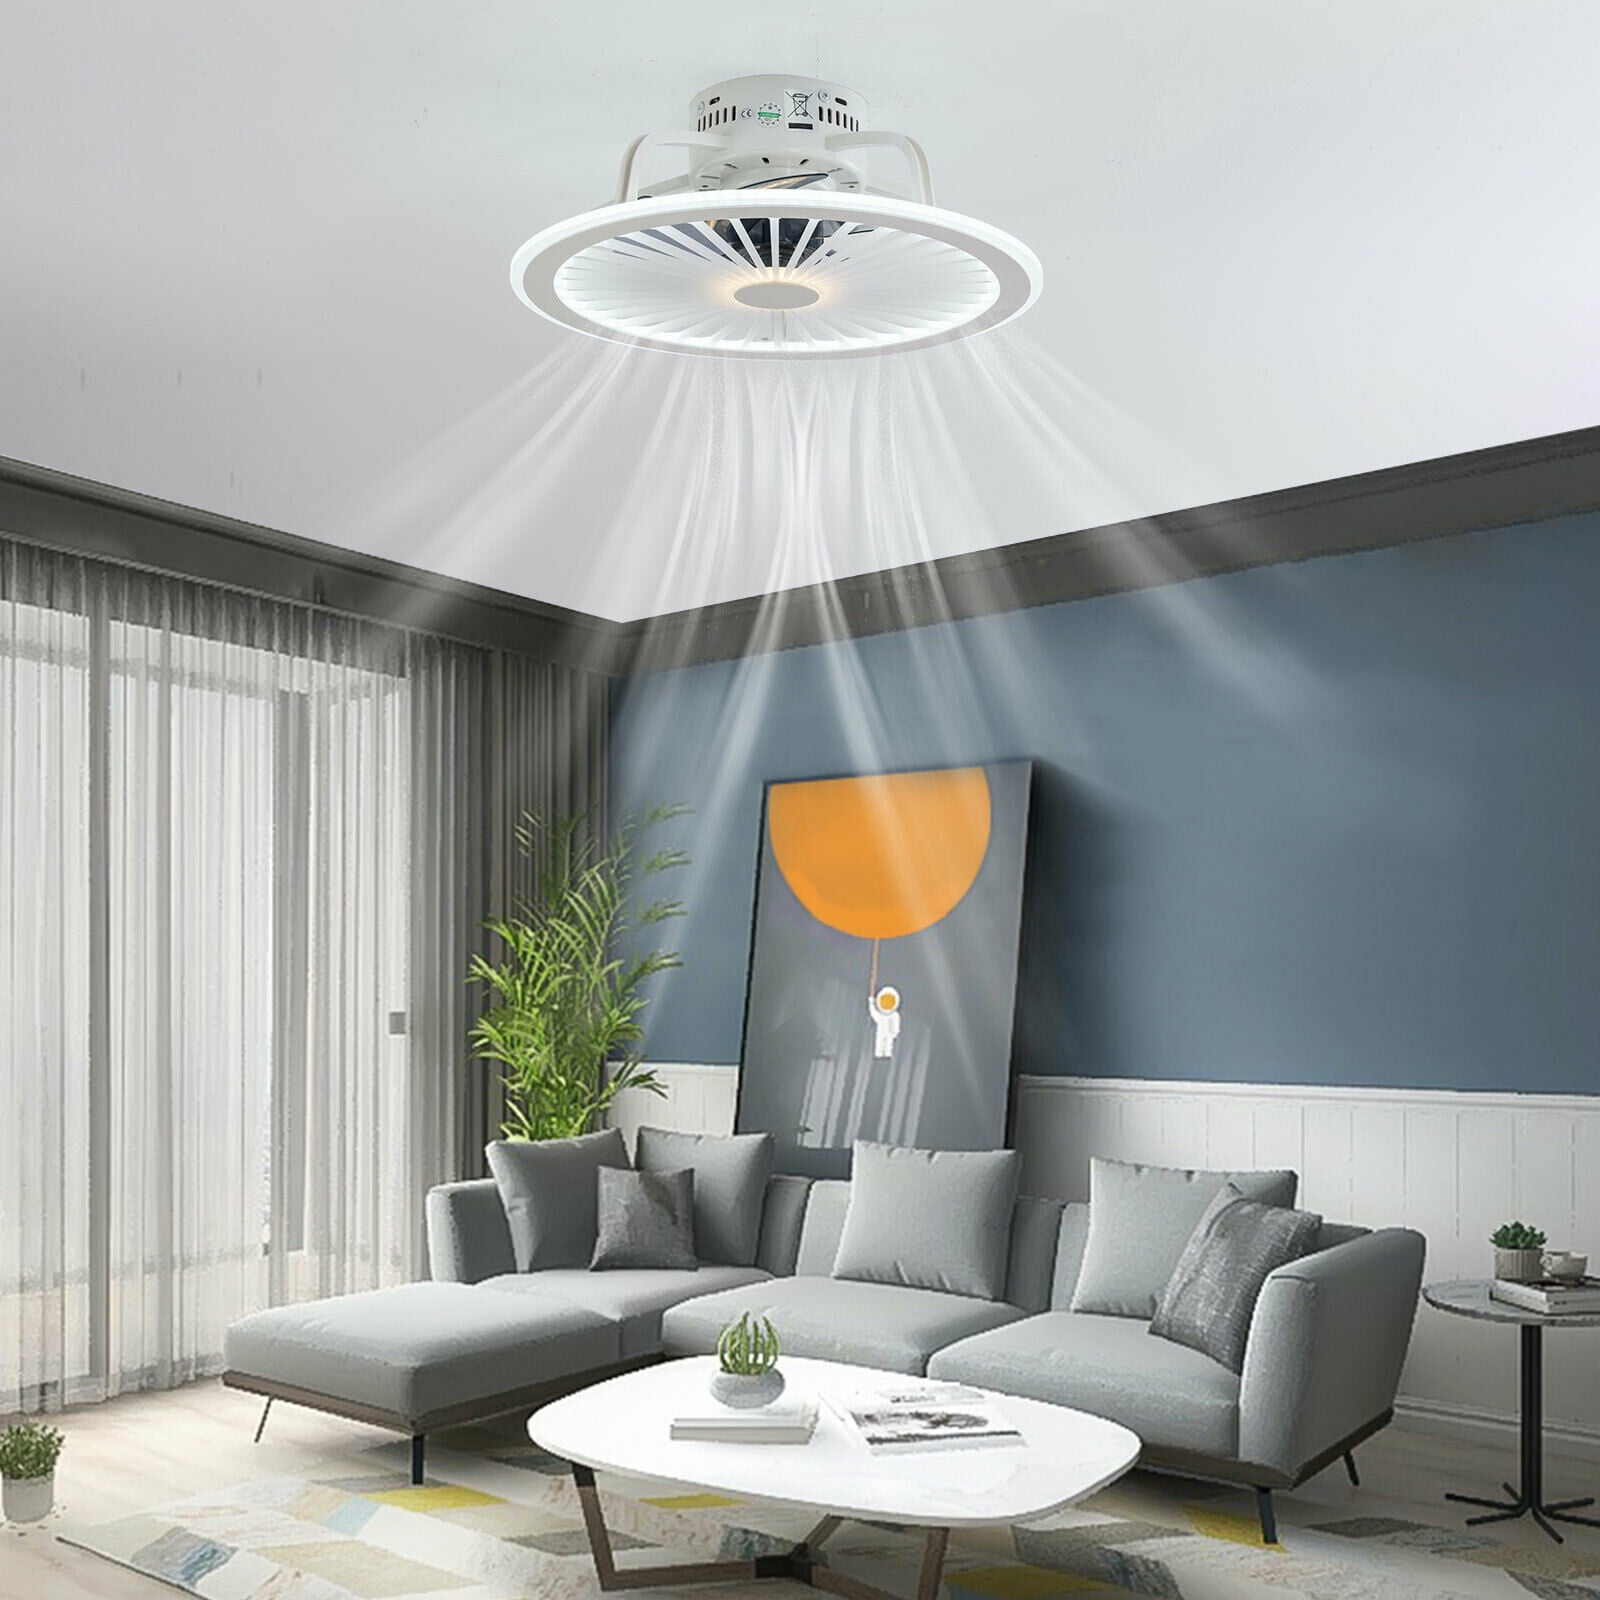 Details about   48W Ceiling Fan Light Modern LED Chandelier With Remote Control & Silent Motor 